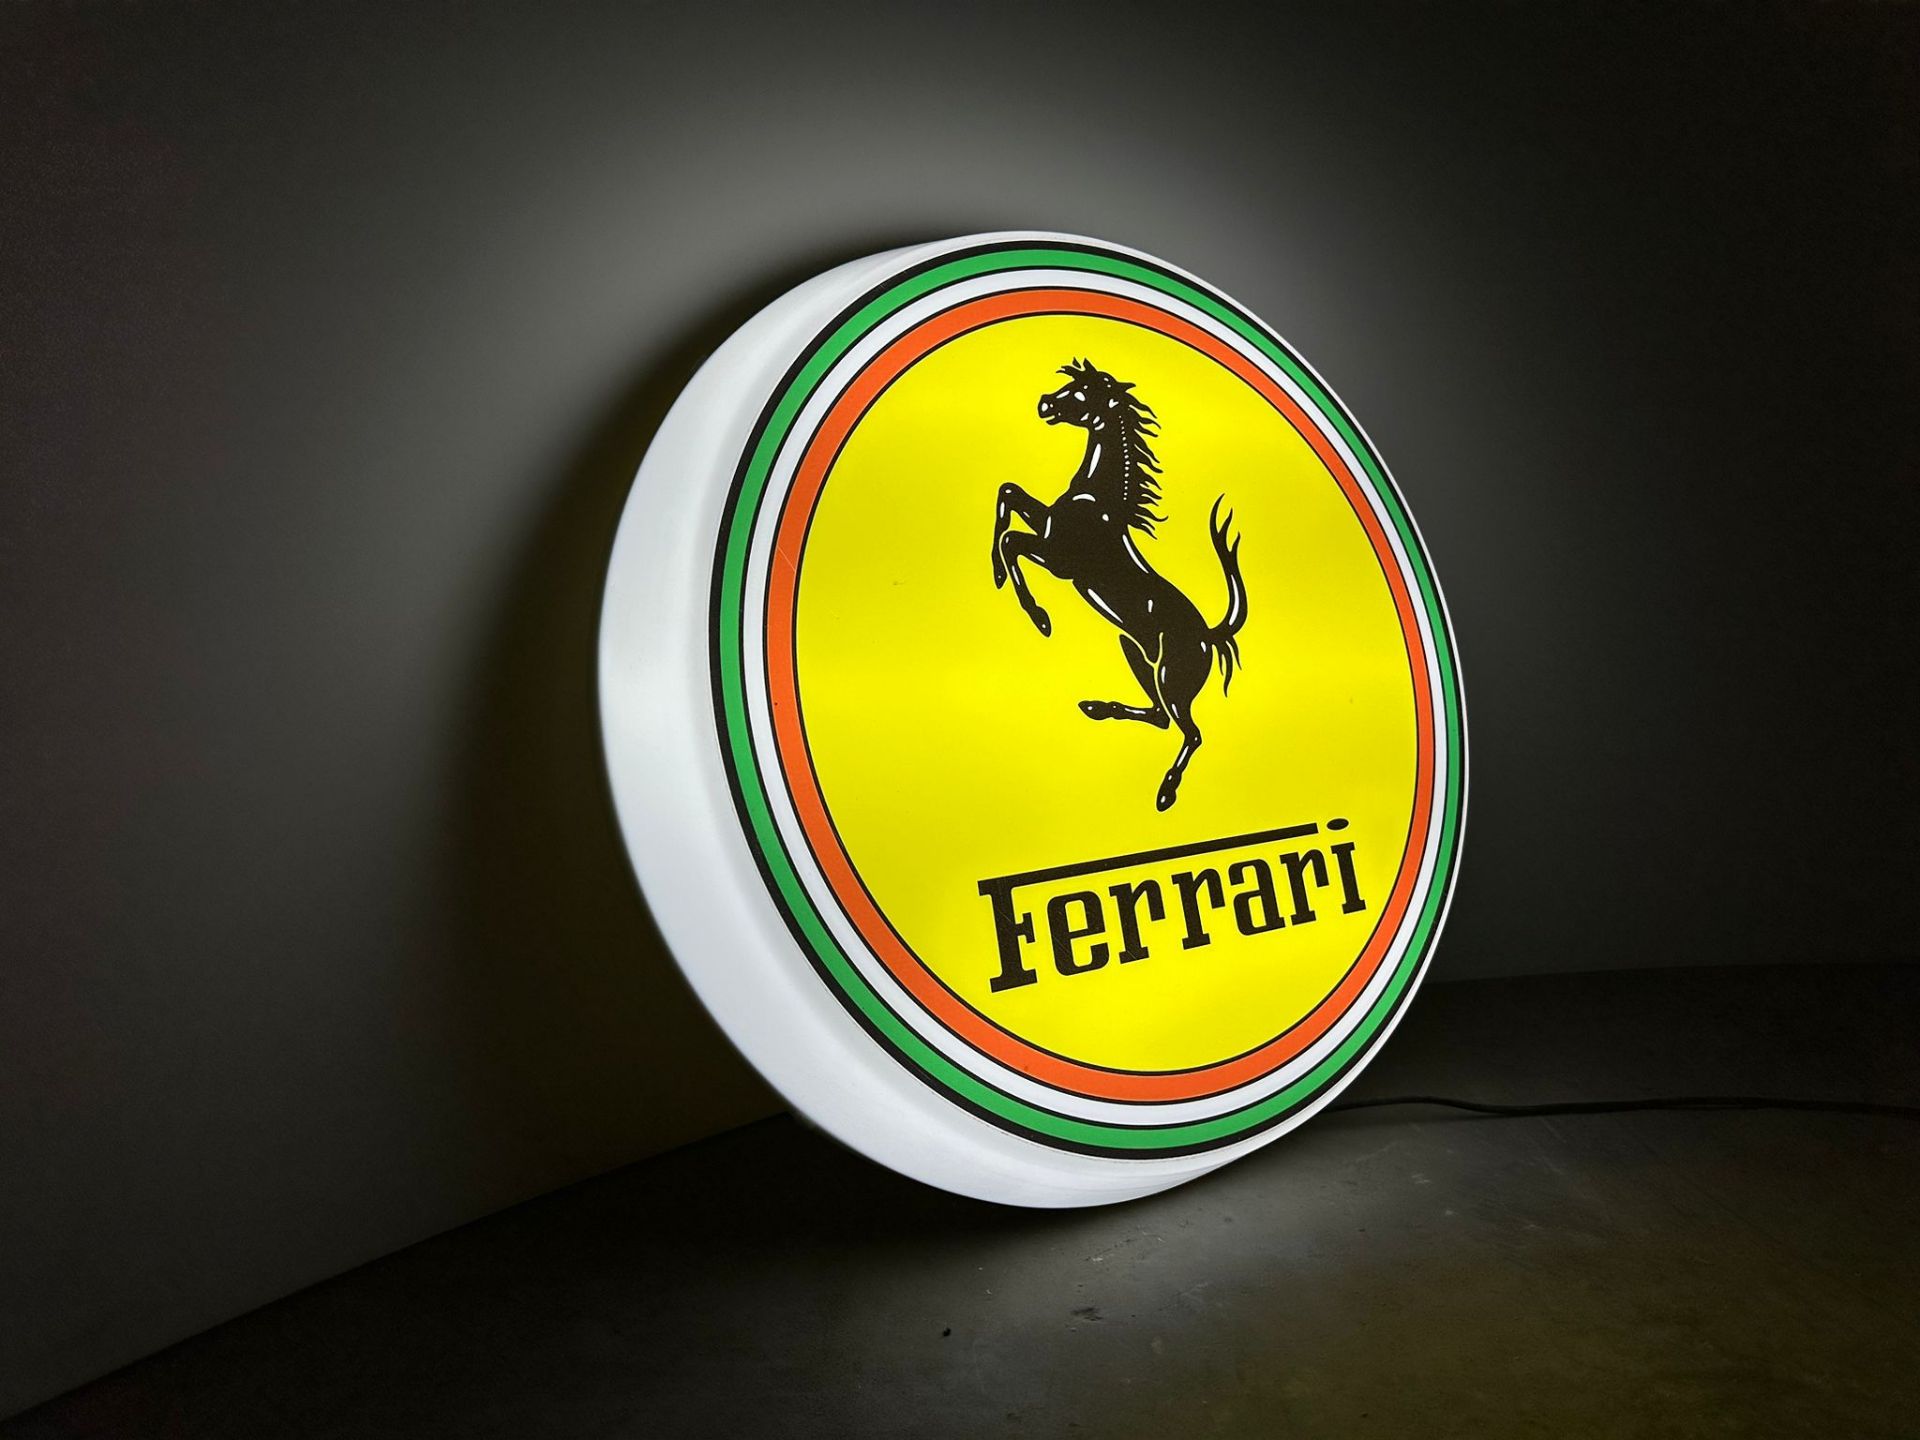 Ferrari fully working illuminated adapted to any country - Image 5 of 6